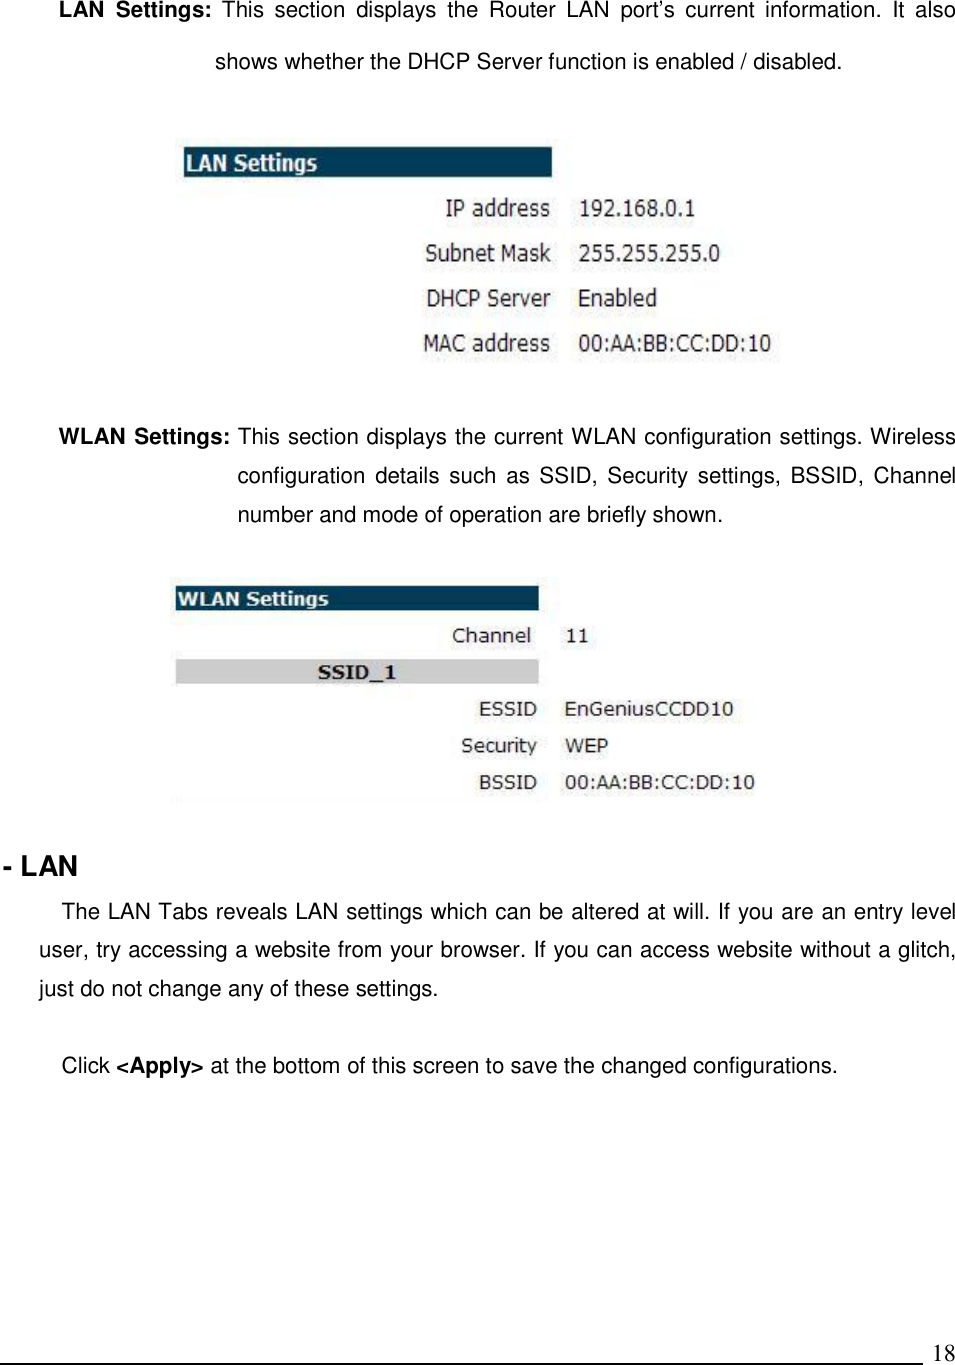   18 LAN  Settings:  This  section  displays  the  Router  LAN  port’s  current  information.  It  also shows whether the DHCP Server function is enabled / disabled.     WLAN Settings: This section displays the current WLAN configuration settings. Wireless configuration details such  as  SSID,  Security settings, BSSID,  Channel number and mode of operation are briefly shown.    - LAN The LAN Tabs reveals LAN settings which can be altered at will. If you are an entry level user, try accessing a website from your browser. If you can access website without a glitch, just do not change any of these settings.  Click &lt;Apply&gt; at the bottom of this screen to save the changed configurations.   